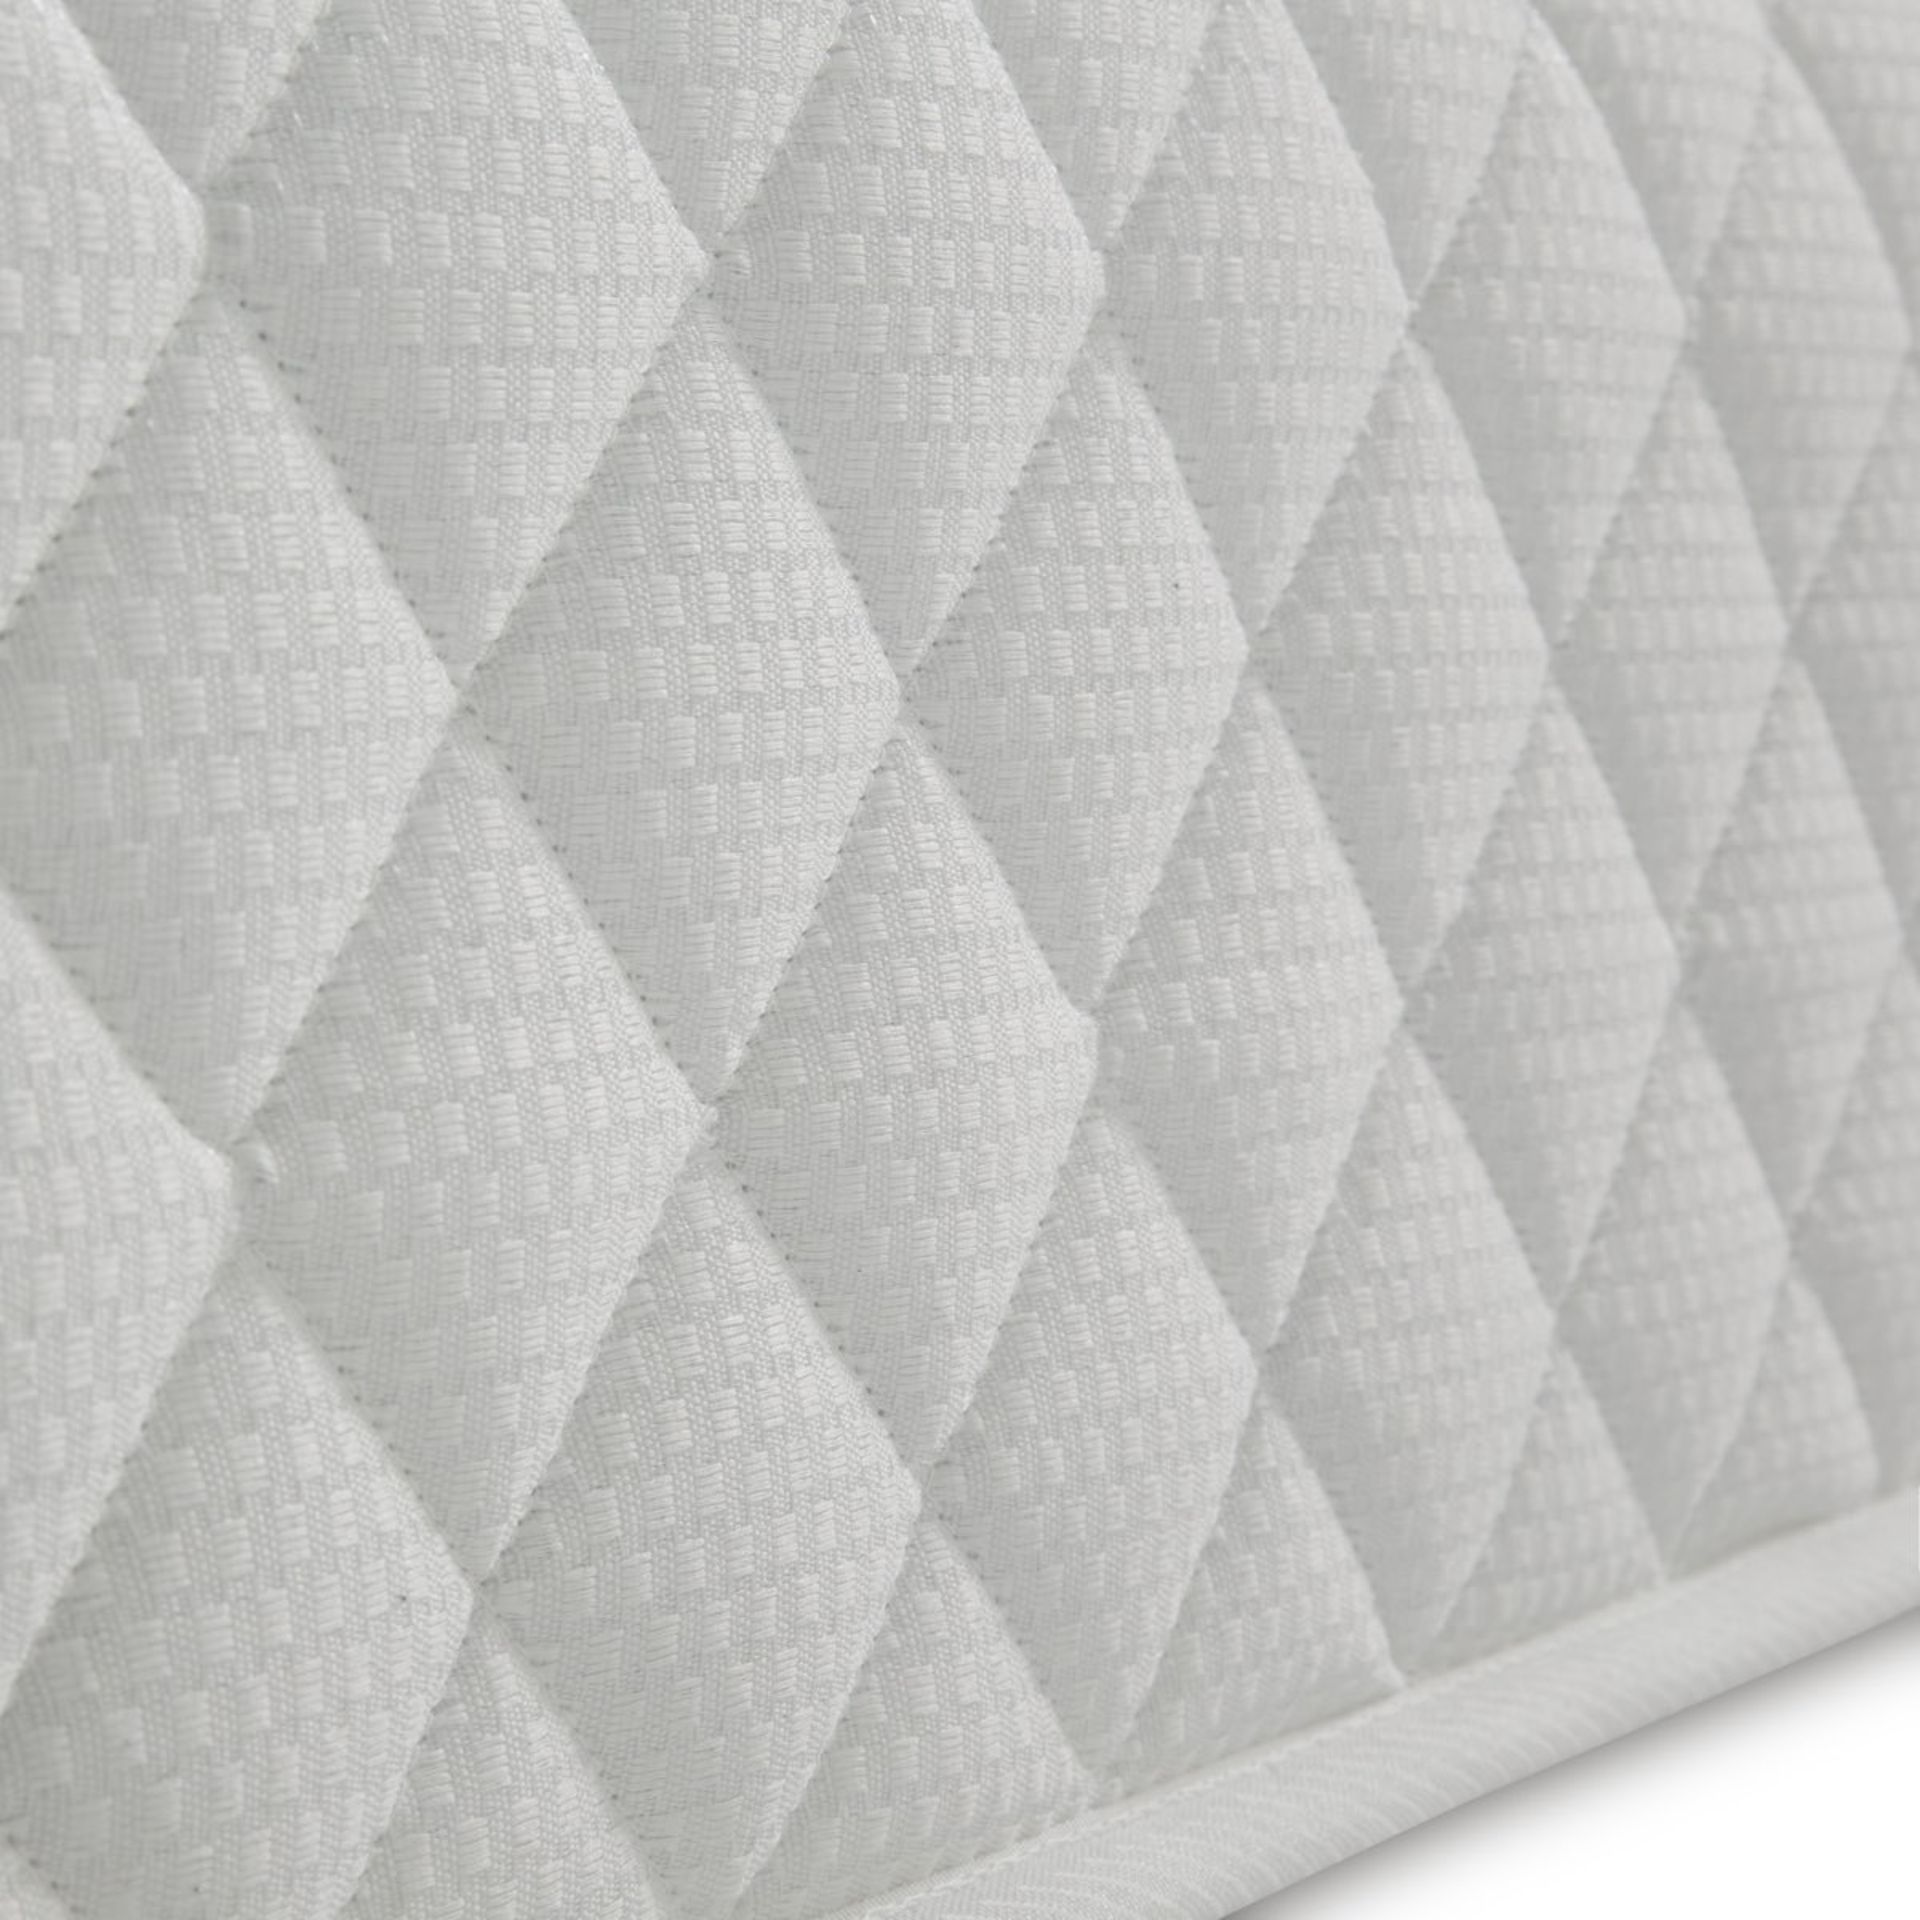 1 x King Size Open Coil Mattress With Memory Foam - Firmness: Medium-soft - Dimensions: 150 x 23 x - Image 4 of 6